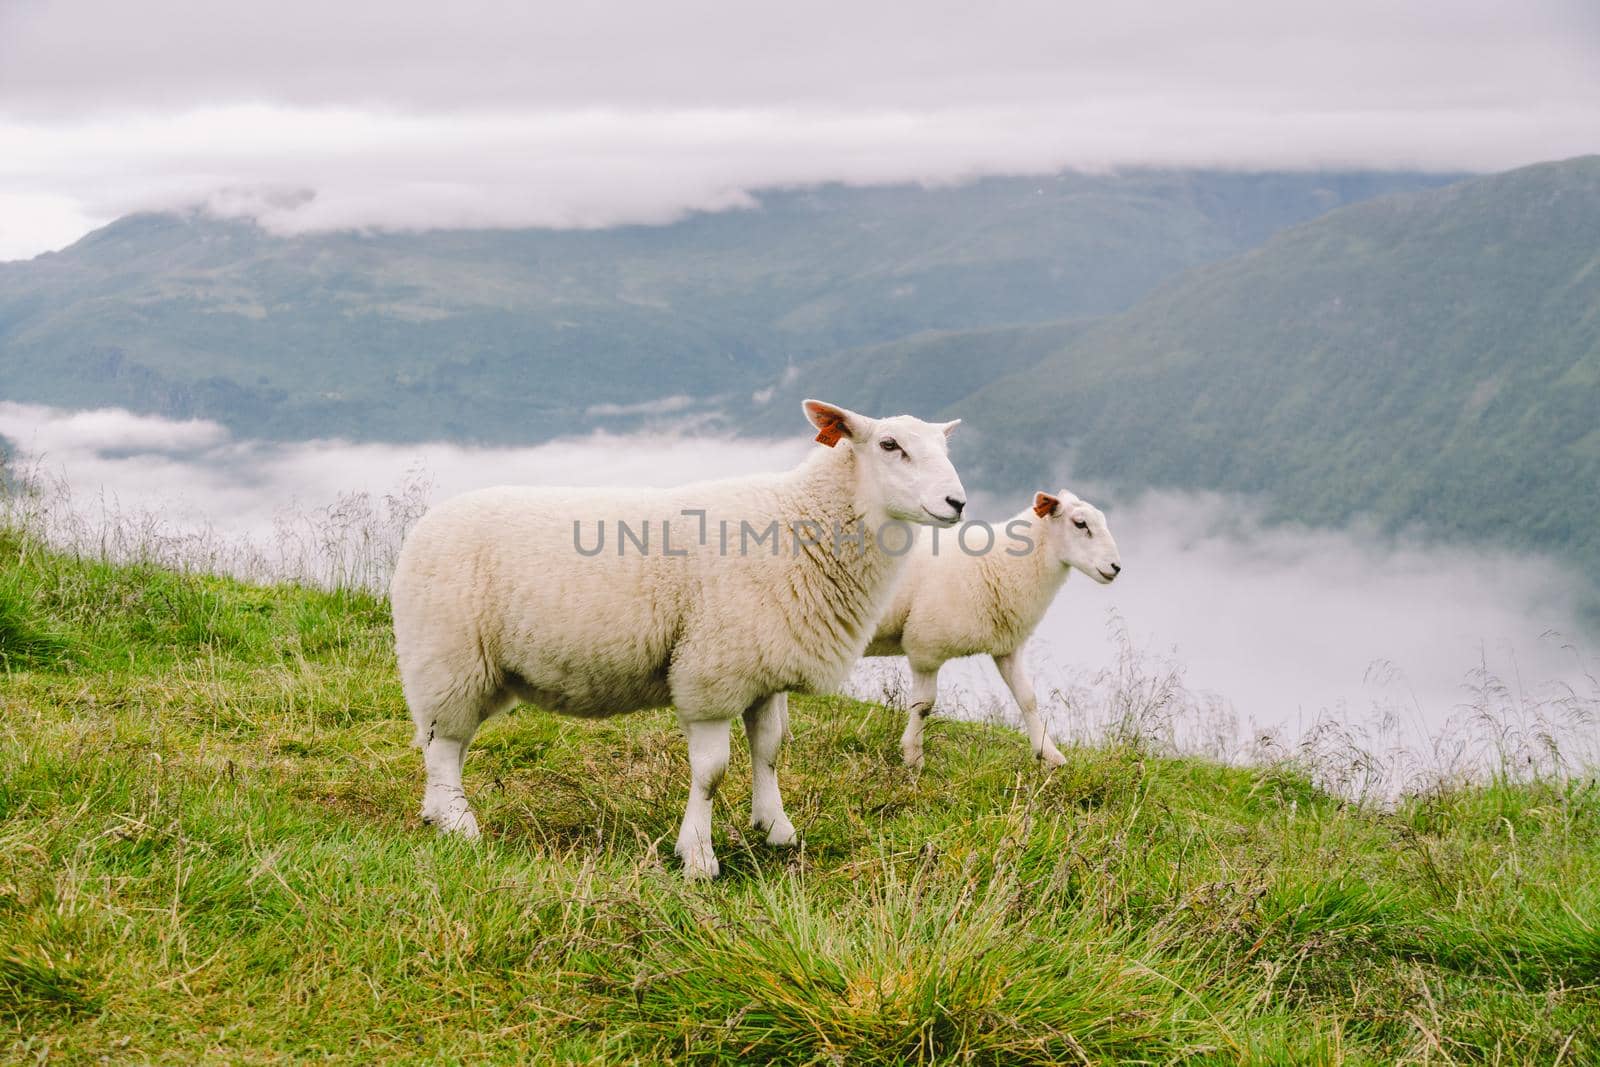 sheeps on mountain farm on cloudy day. Norwegian landscape with sheep grazing in valley. Sheep on mountaintop Norway. Ecological breeding. Sheep eat boxwood. Ewe sheep grazing on pasture in mountain.